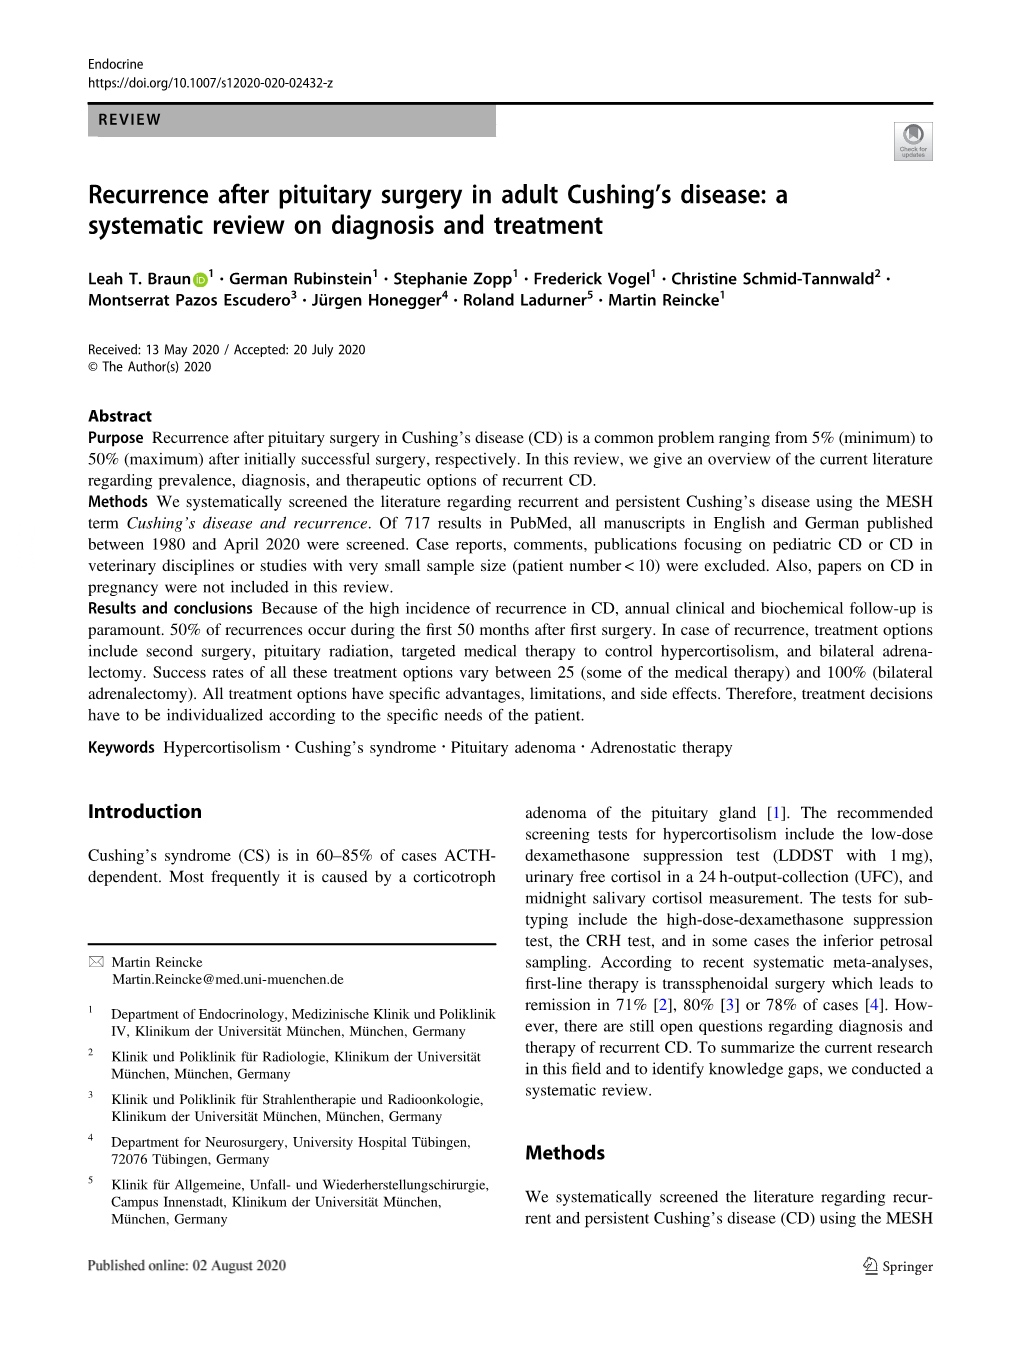 Recurrence After Pituitary Surgery in Adult Cushing's Disease: a Systematic Review on Diagnosis and Treatment